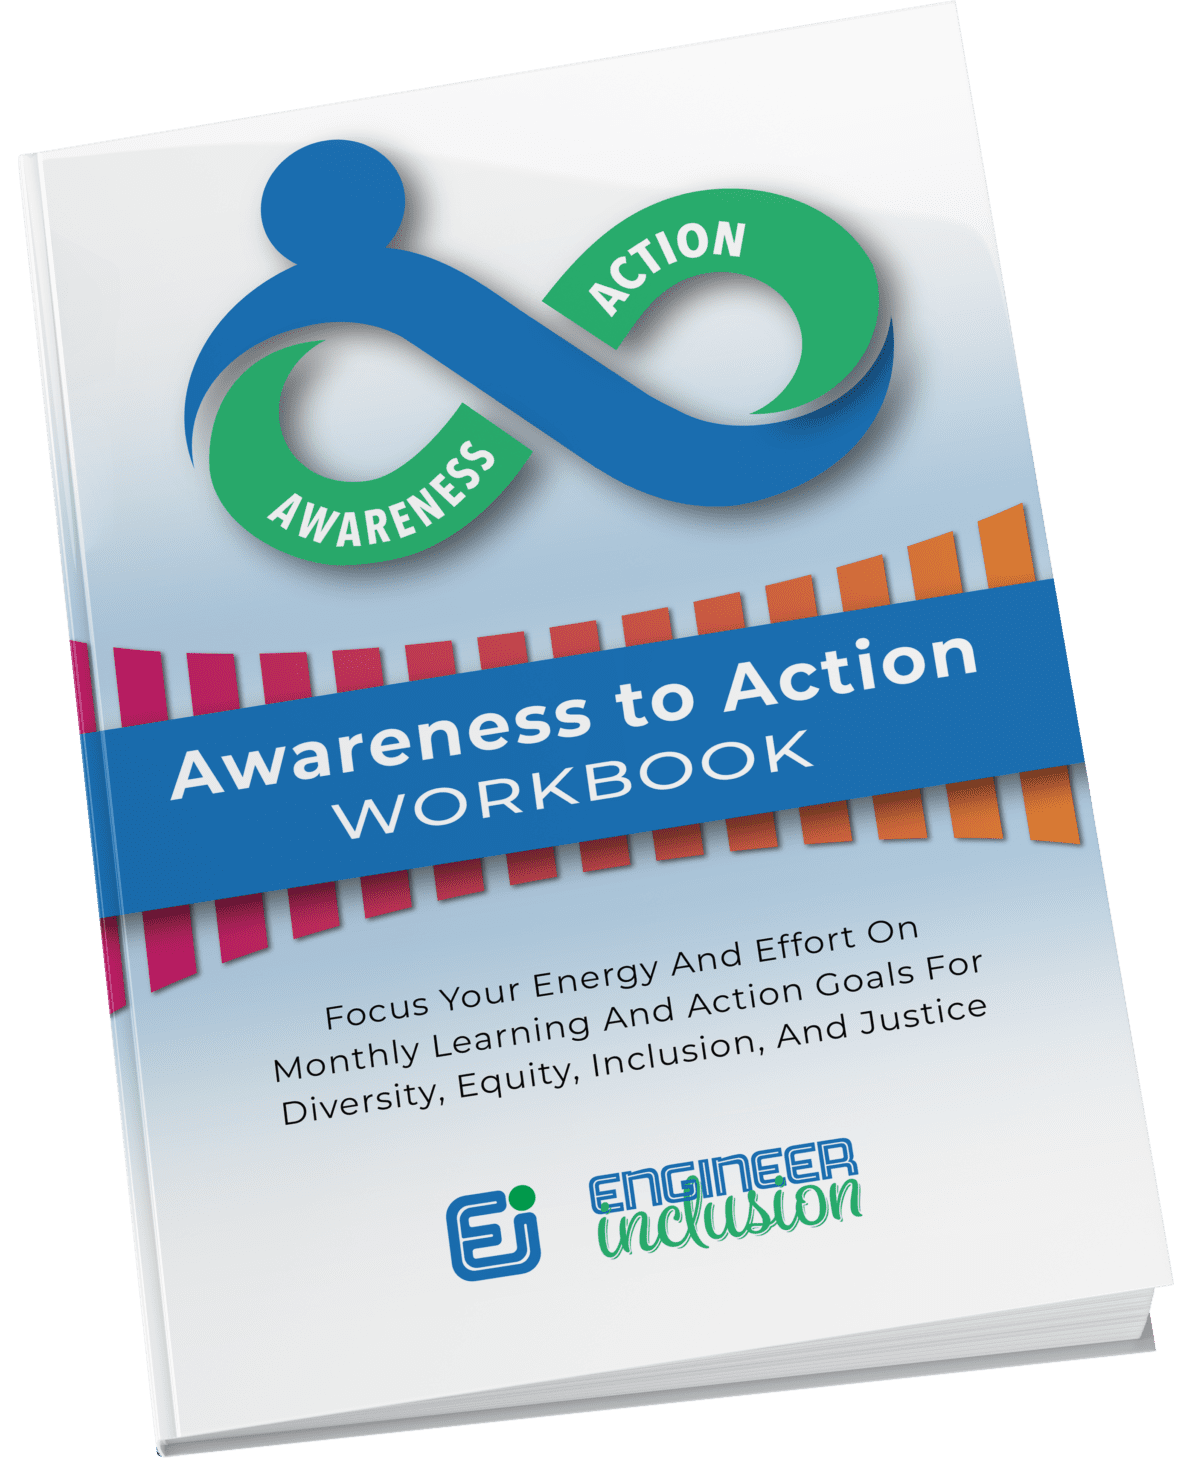 Awareness to Action Workbook by Meagan Pollock, PhD